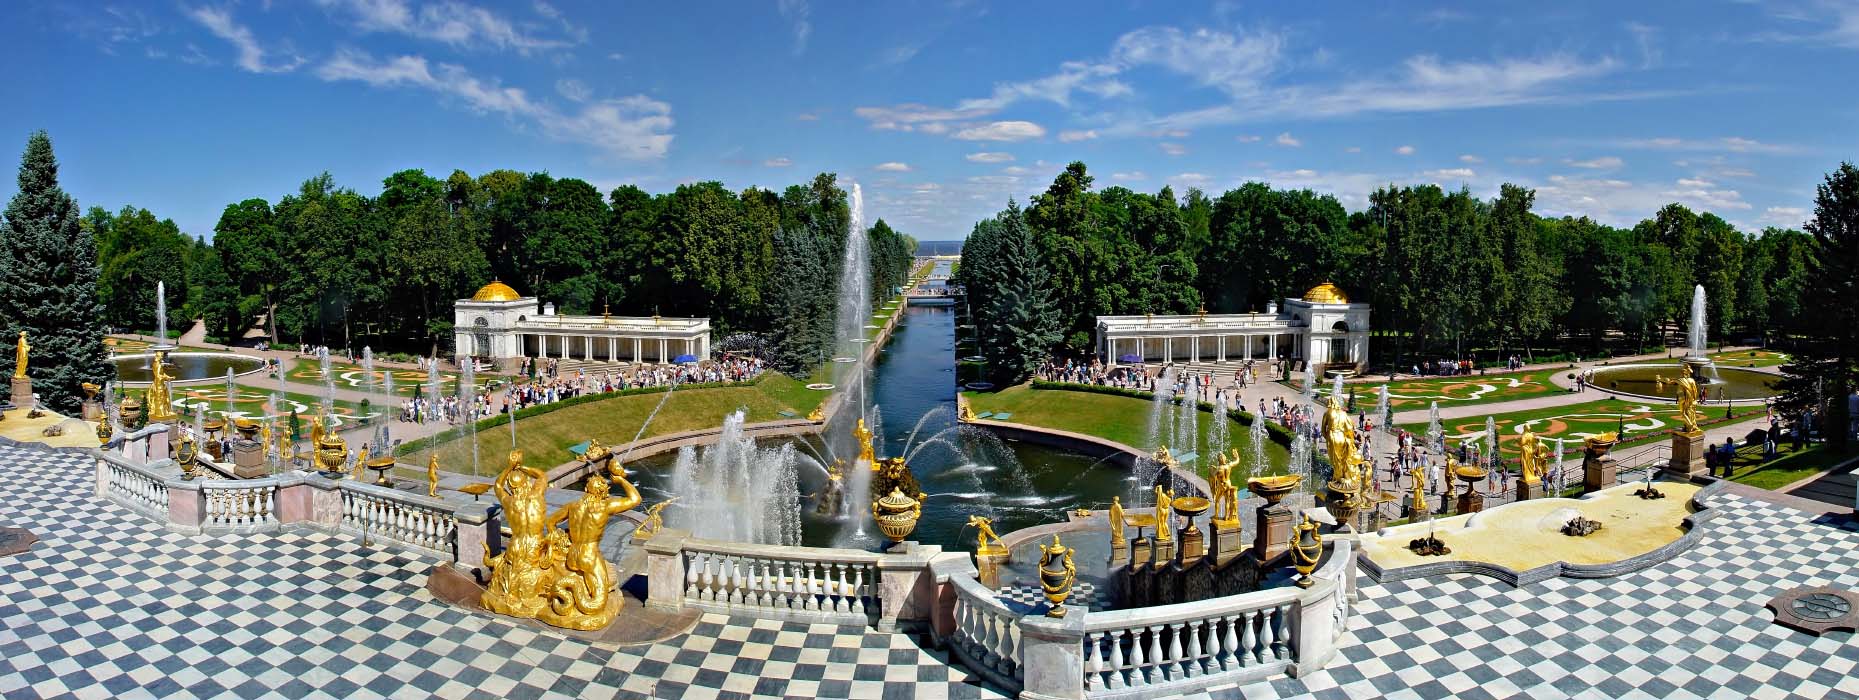 Tour operators in Saint Petersburg, Russia - The Independent Traveller (English Forum)